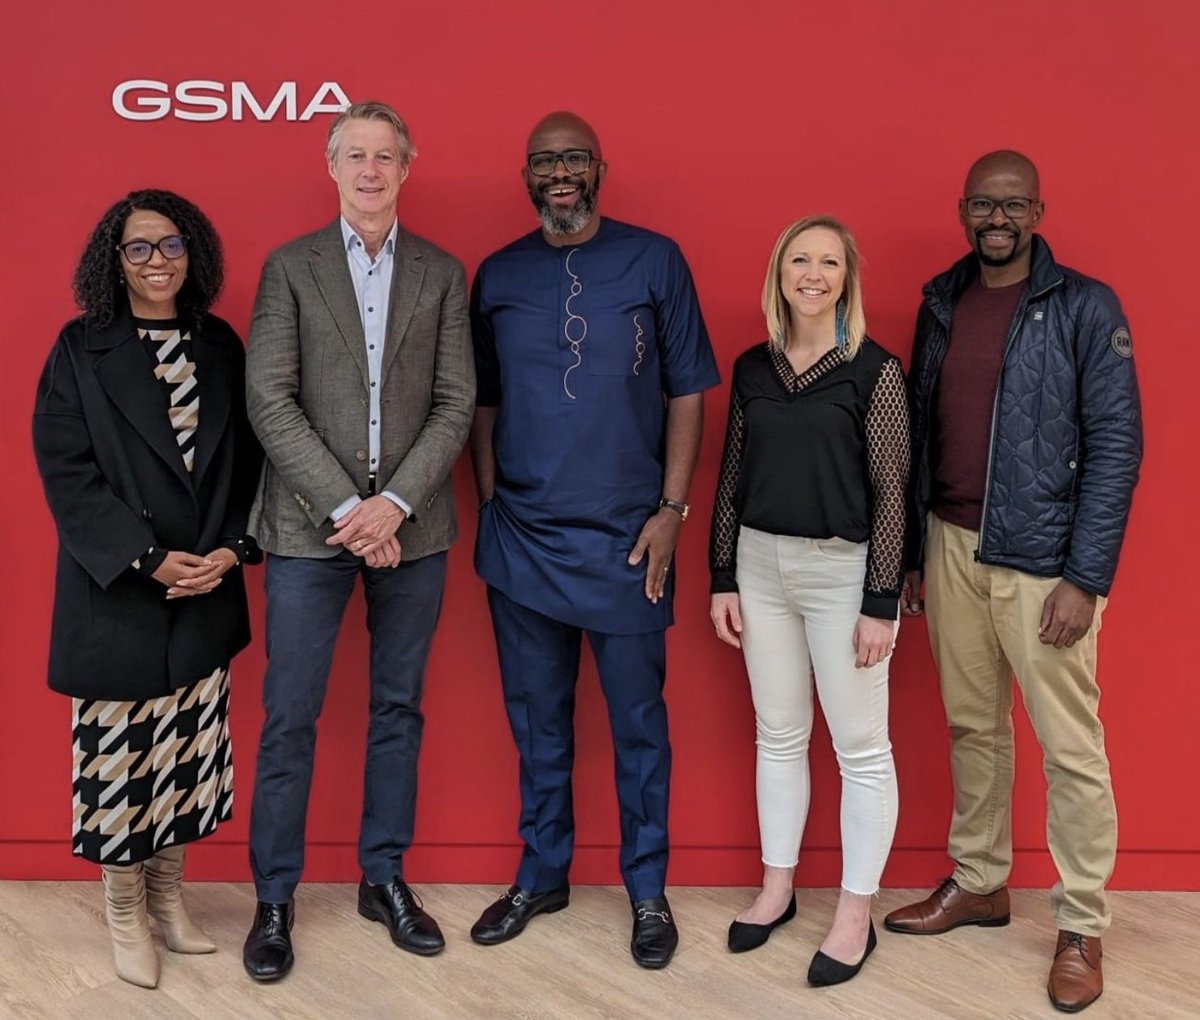 At the #GSMA, we are all about connecting stakeholders and building relationships 🤝 It was great to have the CEO of @MTNGroup, Ralph Mupita, swing by our GSMA London office for a chat with @MatsGranryd and the team! 🌟